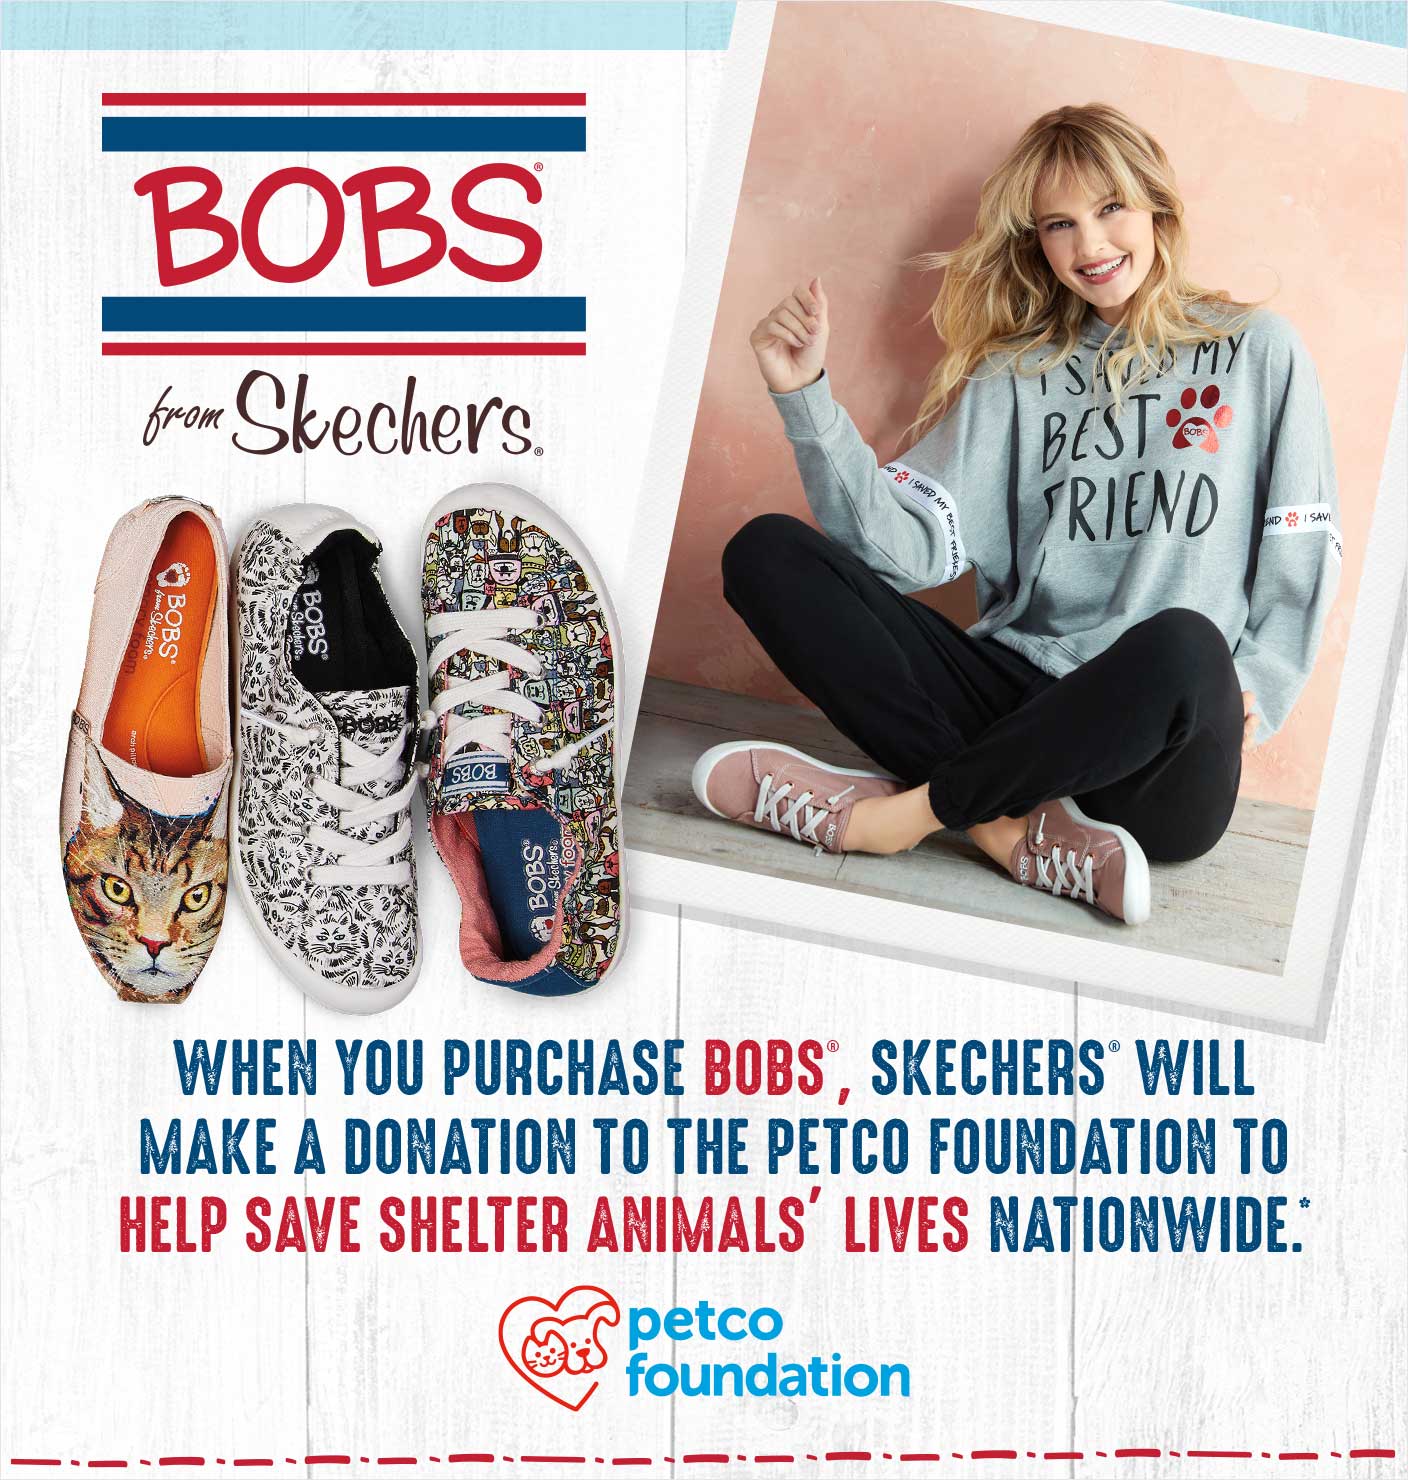 Skechers Bobs for Dogs Partners with Petco®